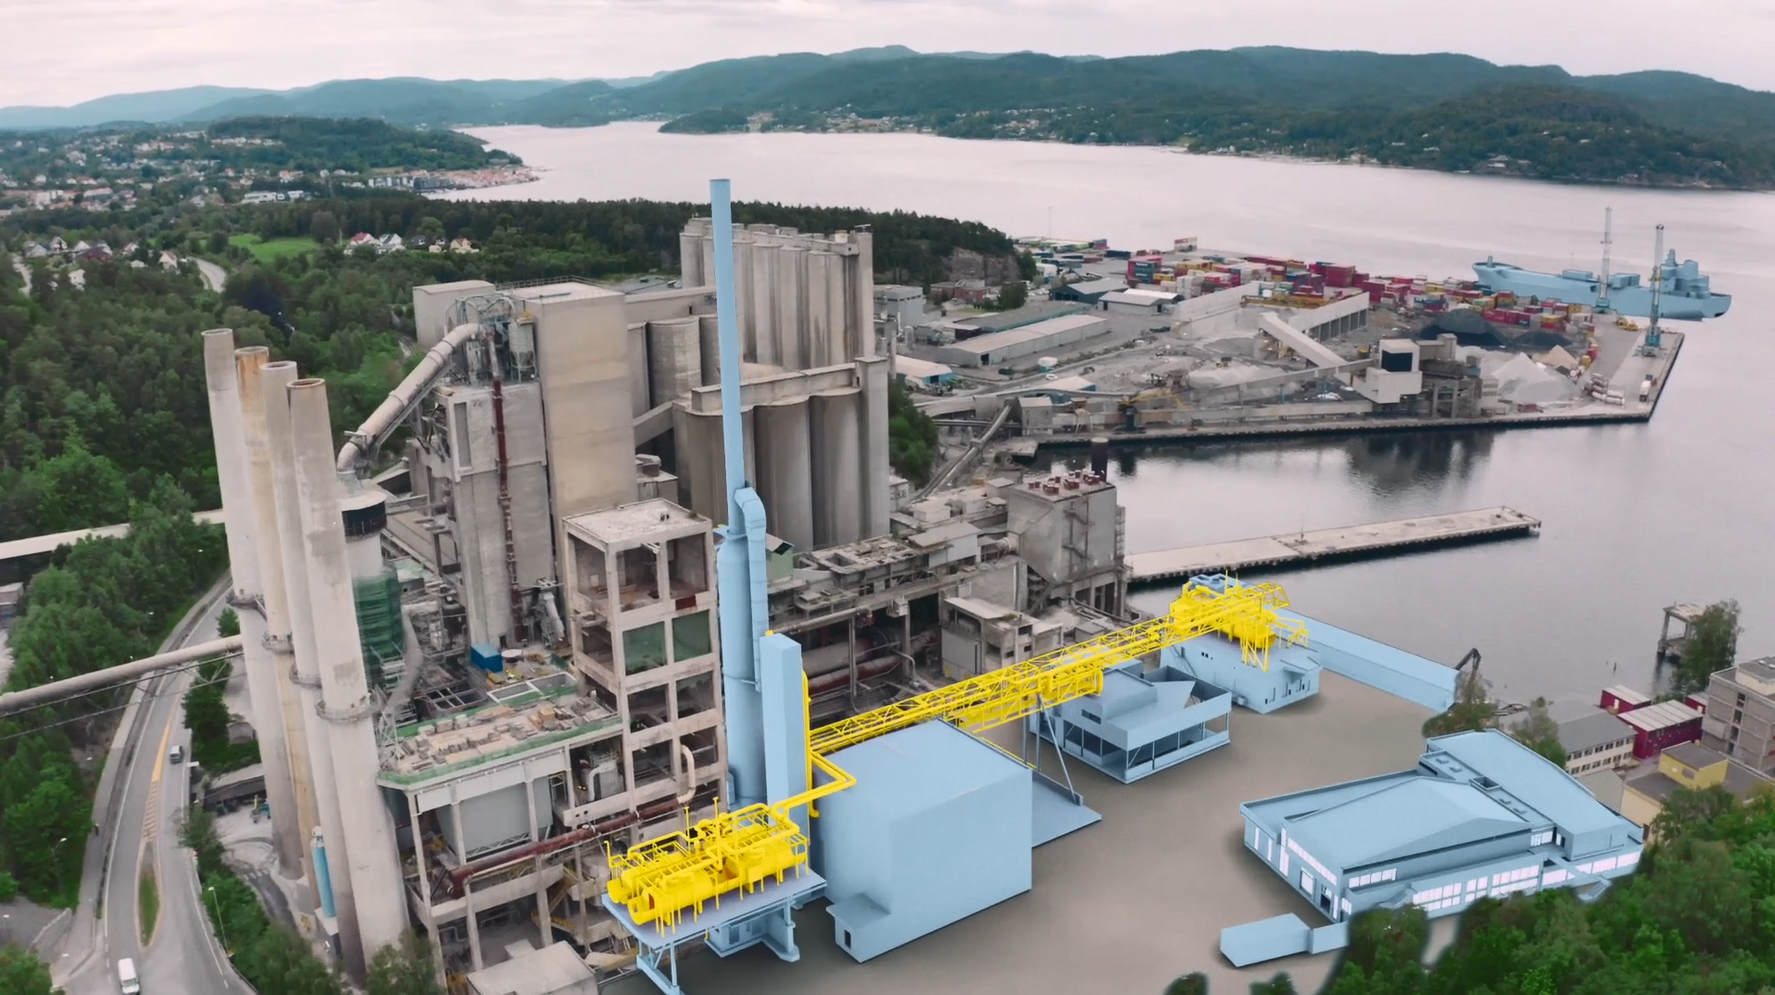 Large cement plant with metal structures, pipes, and the “Heidelberg Materials” logo-bearing tower against a clear sky. A blue and yellow part in front serves as an illustrative element, representing the expansion of the facility.